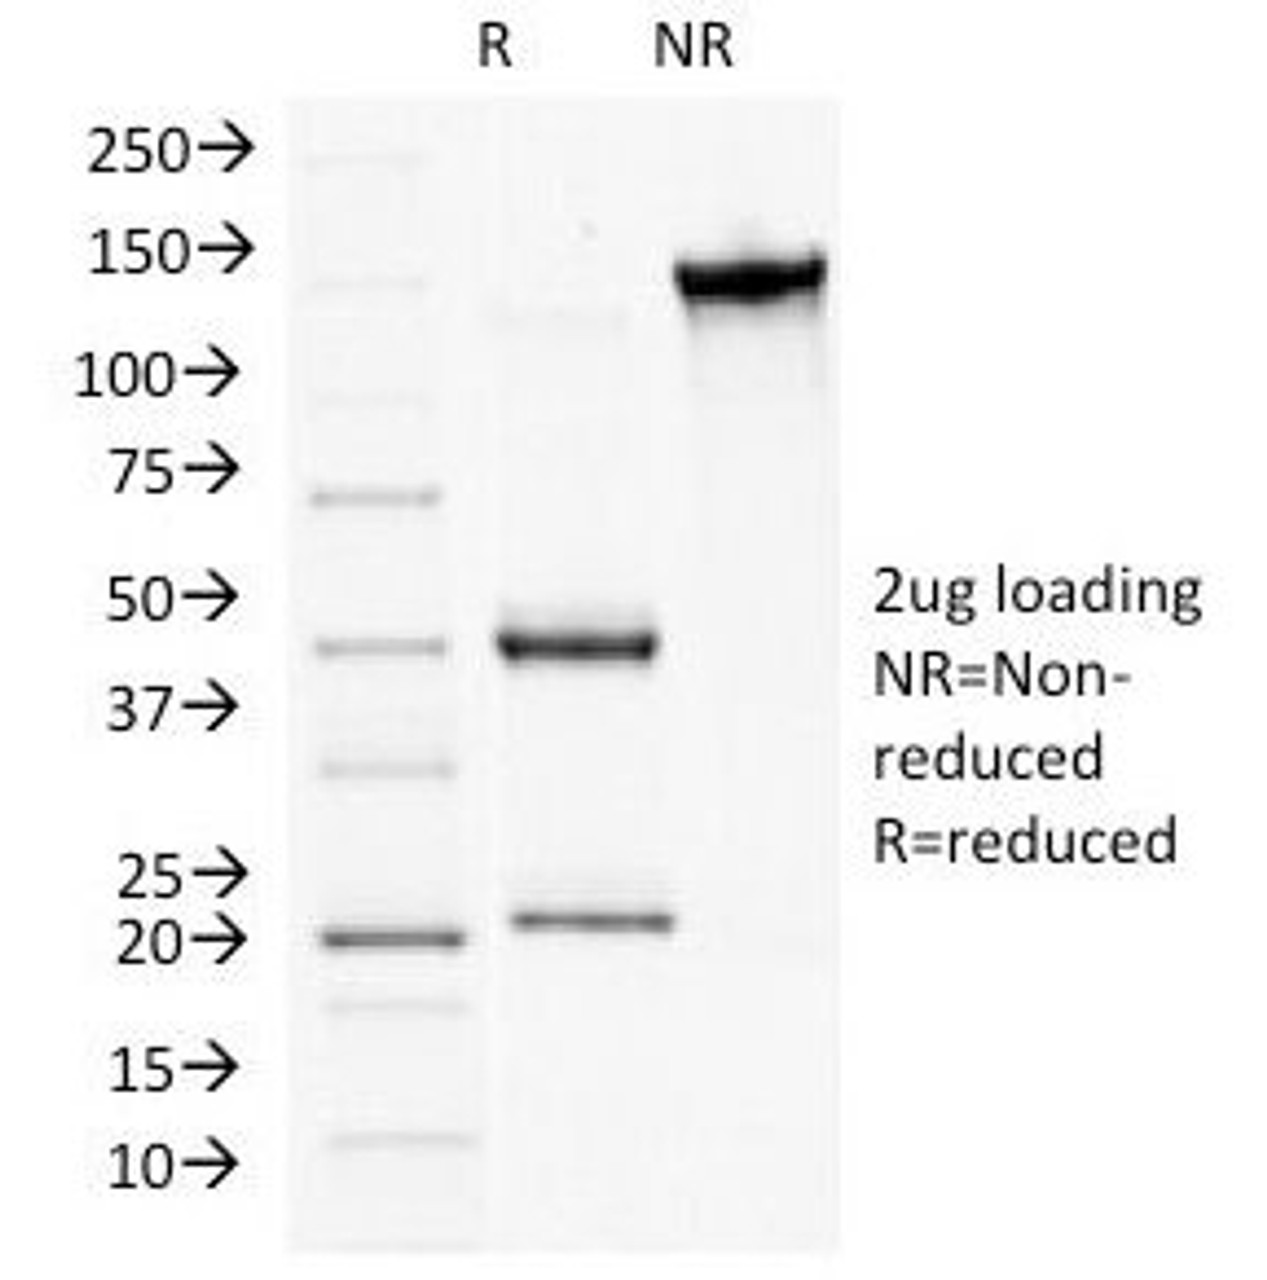 SDS-PAGE Analysis of Purified, BSA-Free Plakophilin 1 Antibody (clone 10B2) . Confirmation of Integrity and Purity of the Antibody.